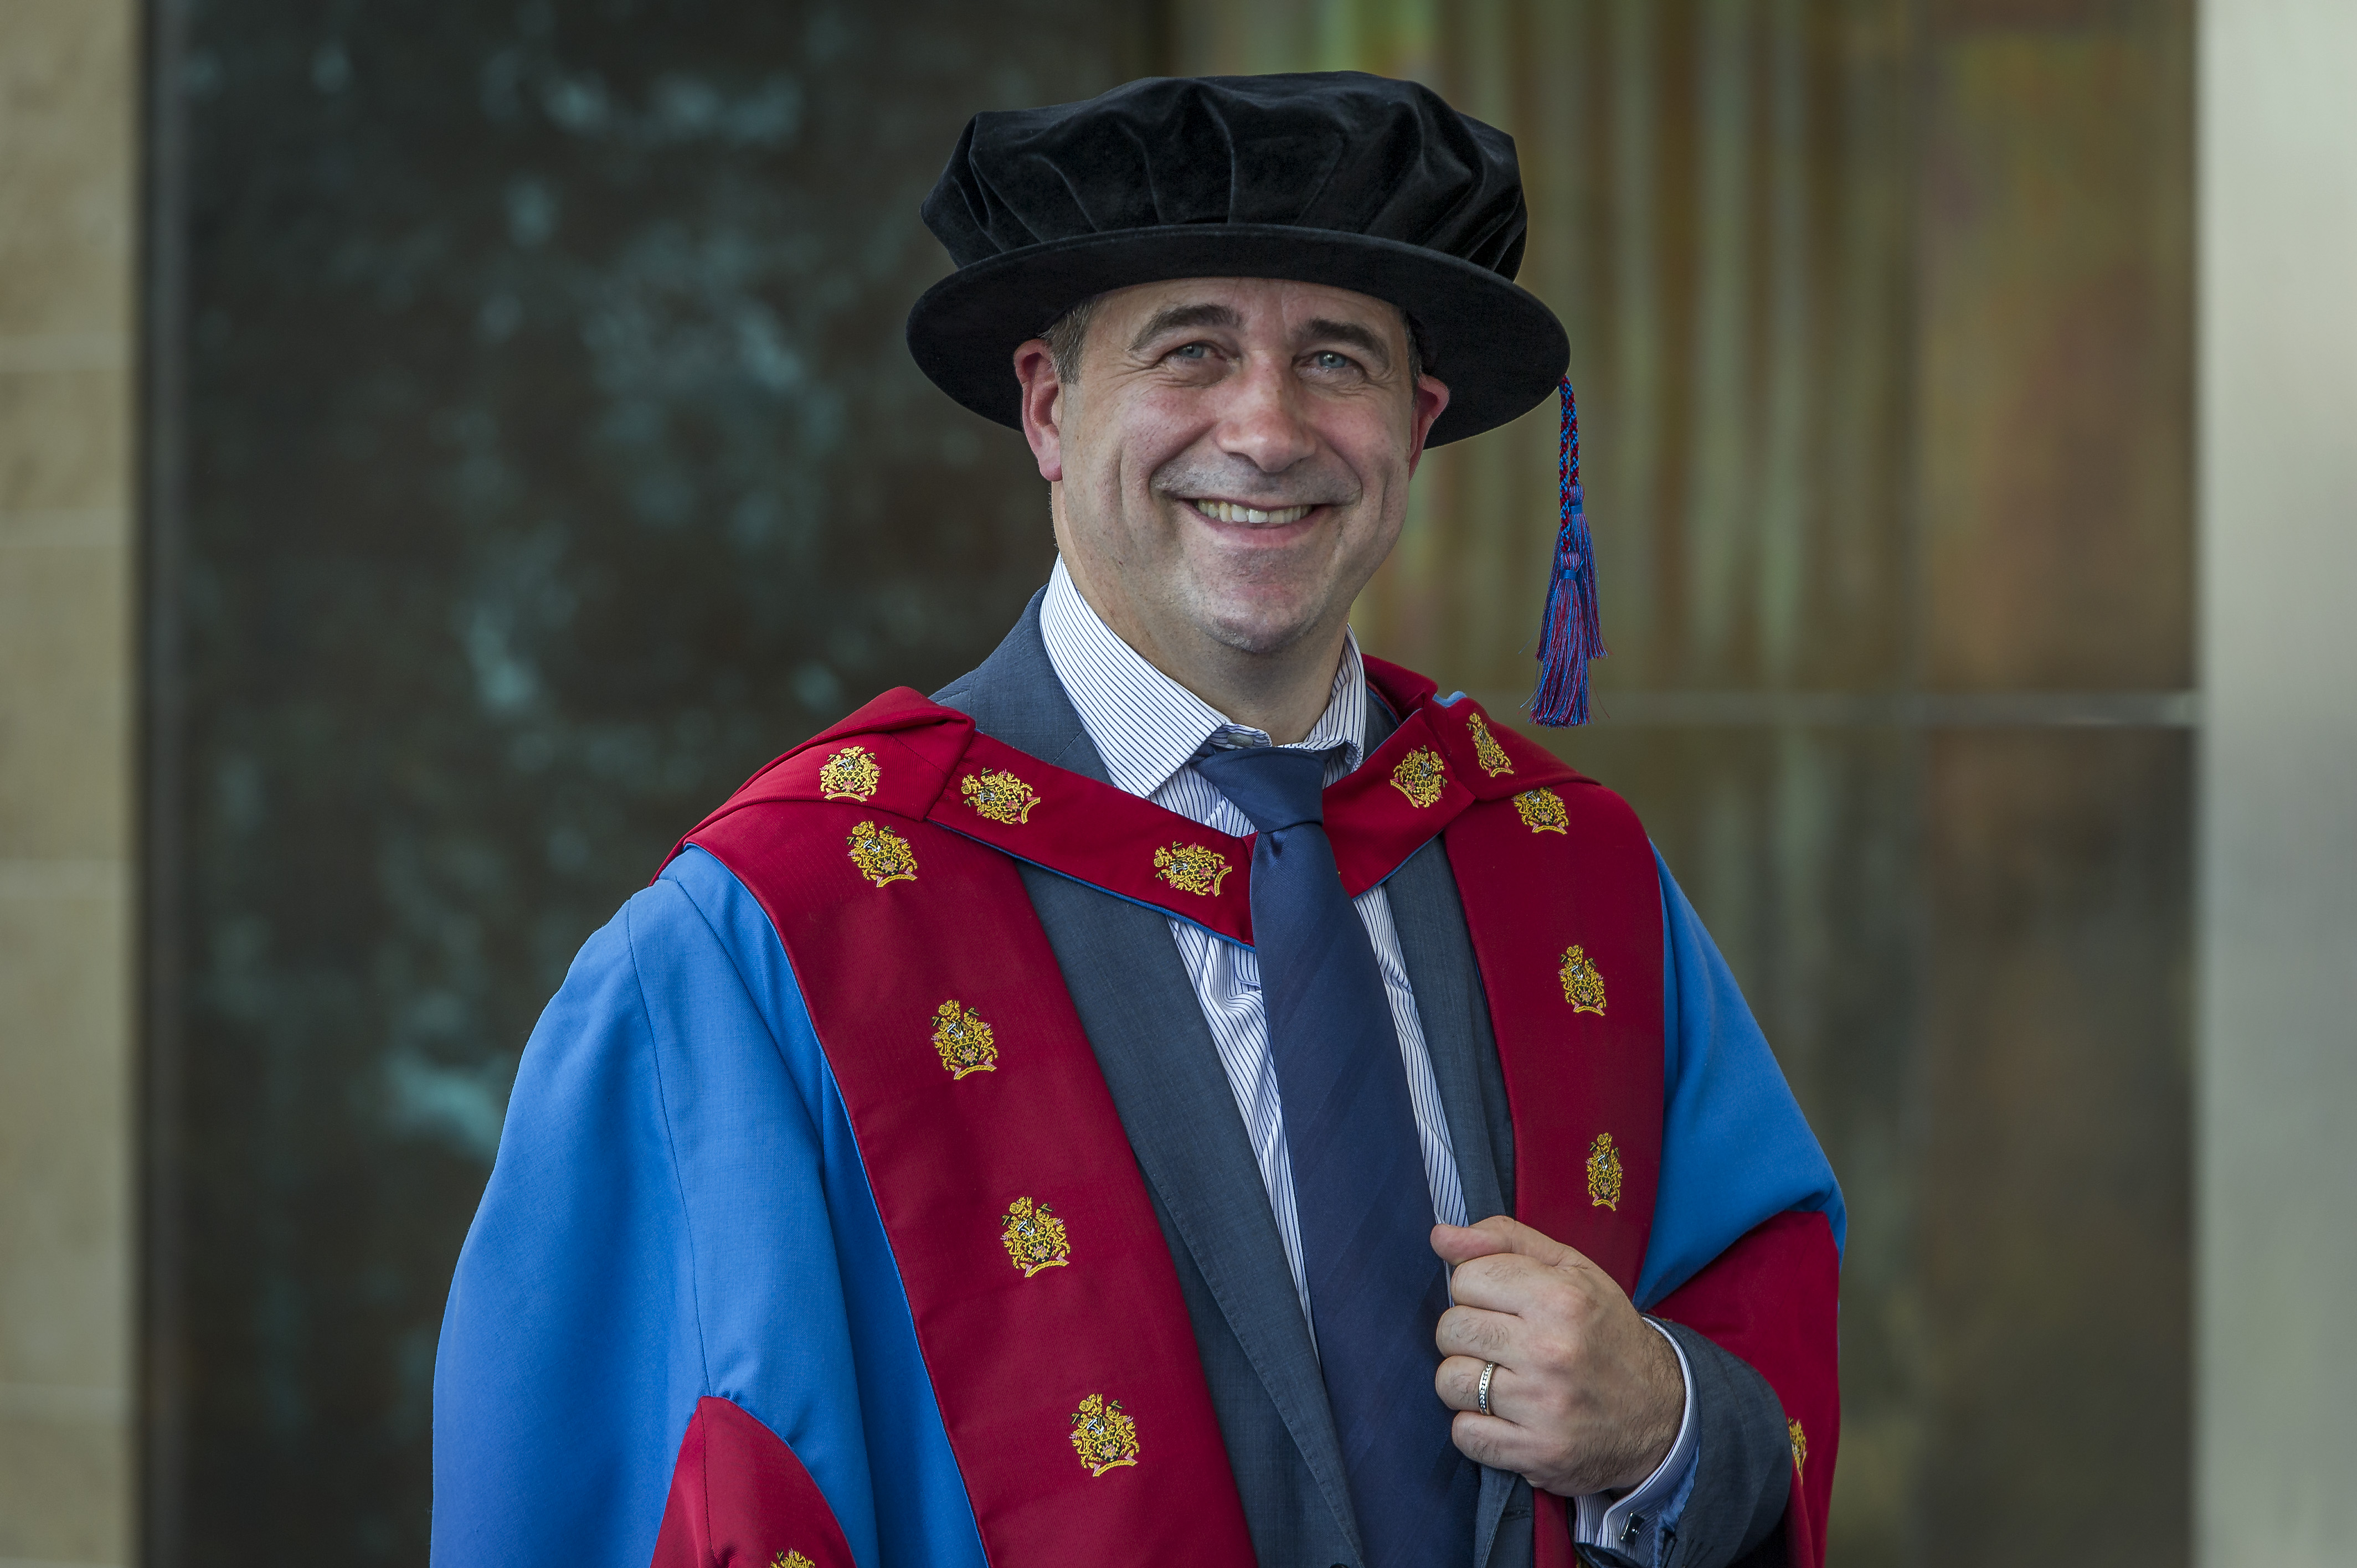 Juergen Maier CBE was awarded an honorary doctorate for his contribution to business and manufacturing sector